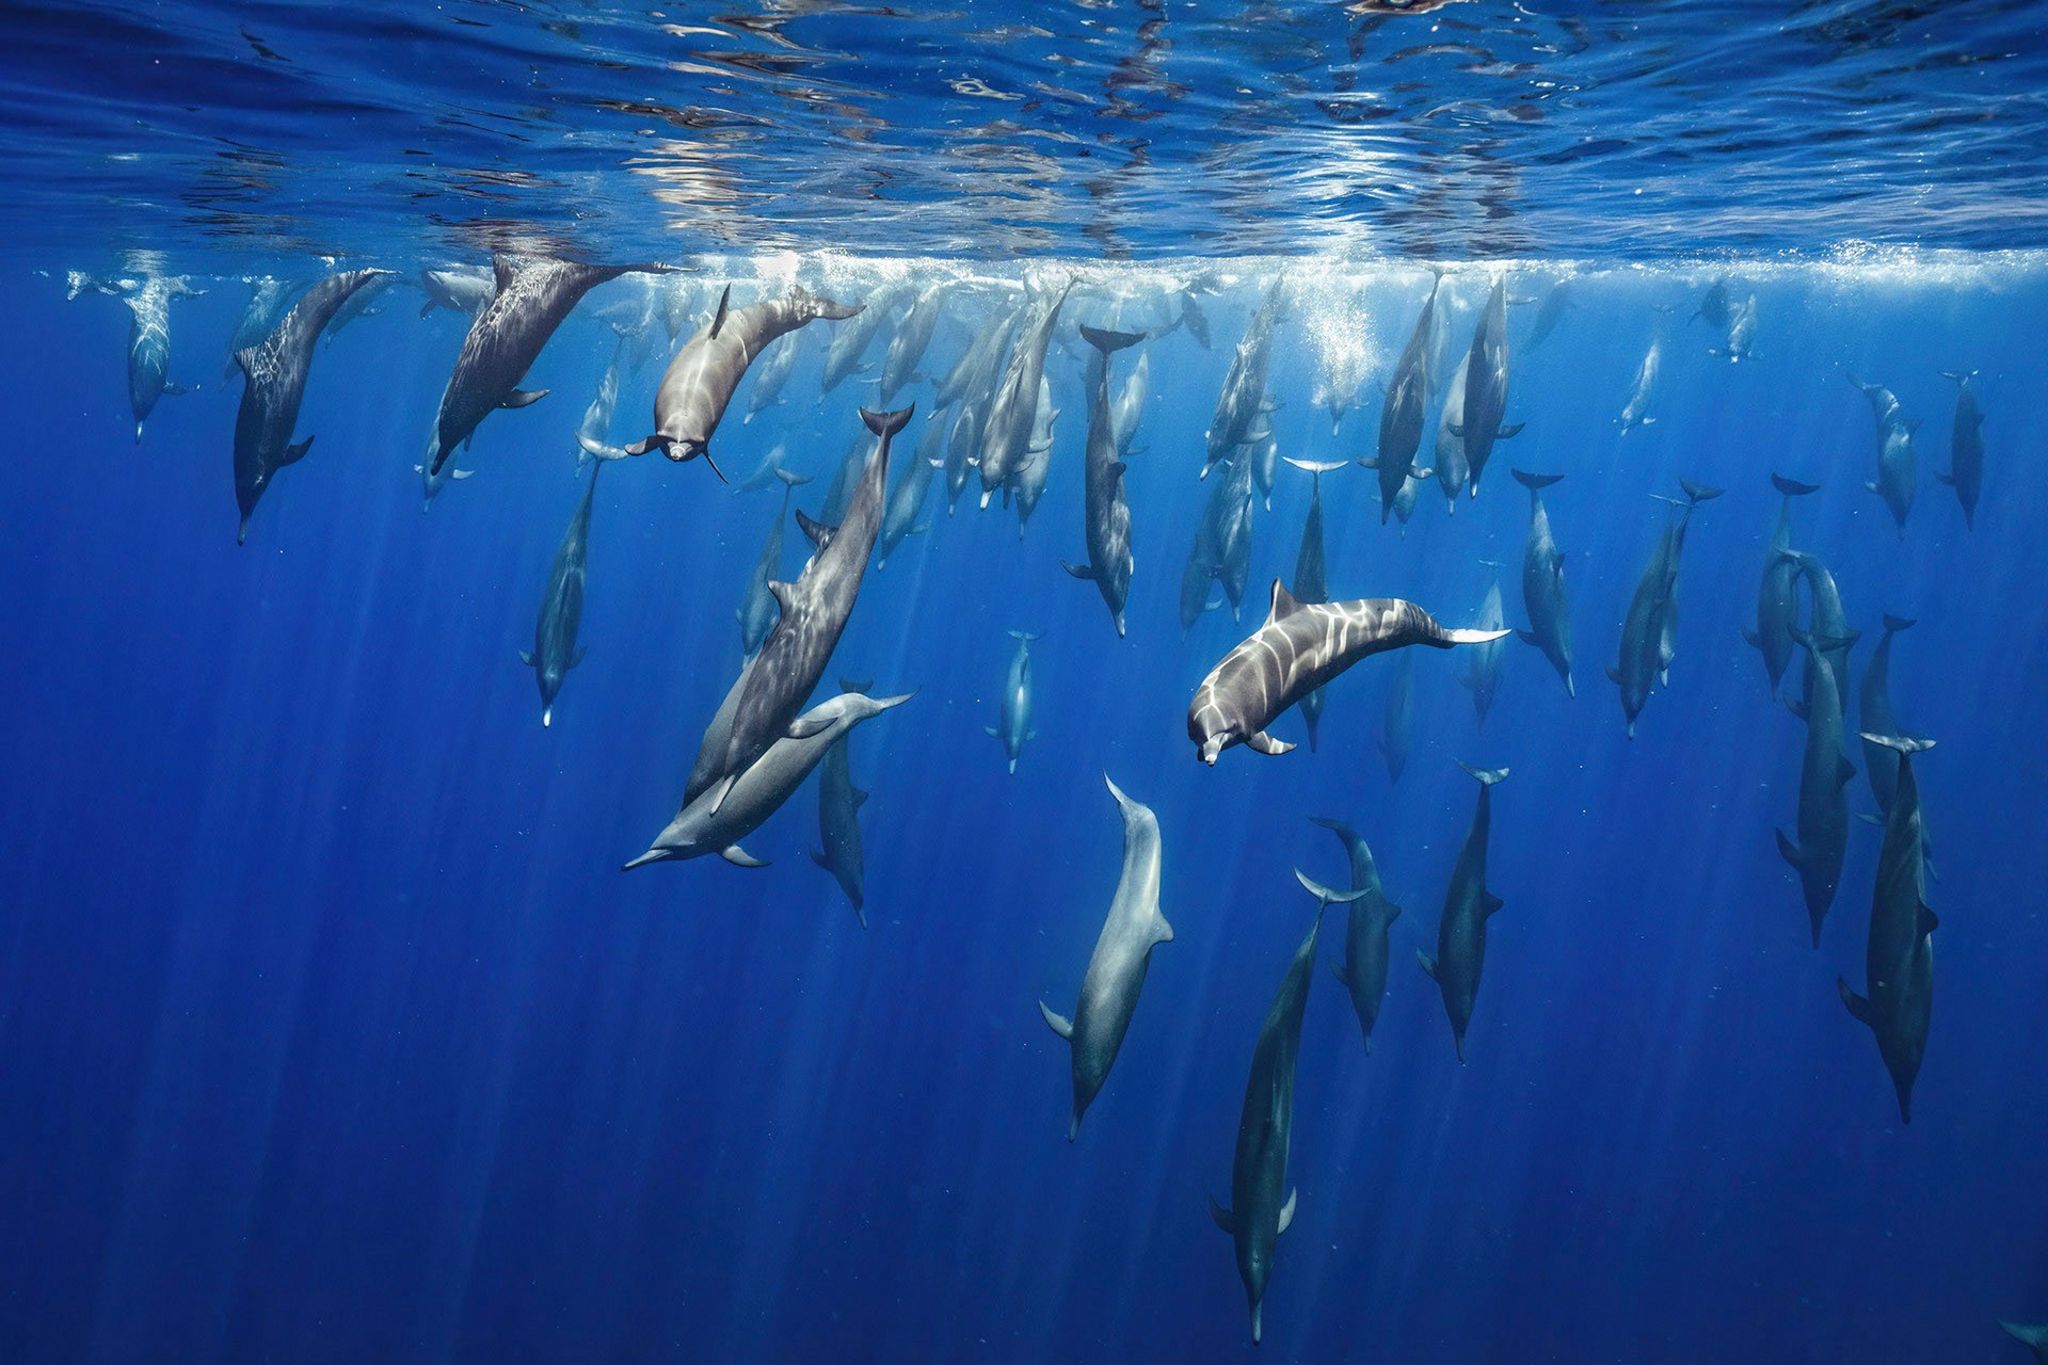 A pod of Spinner Dolphins dives back into the beautifully lit waters of the Pacific Ocean